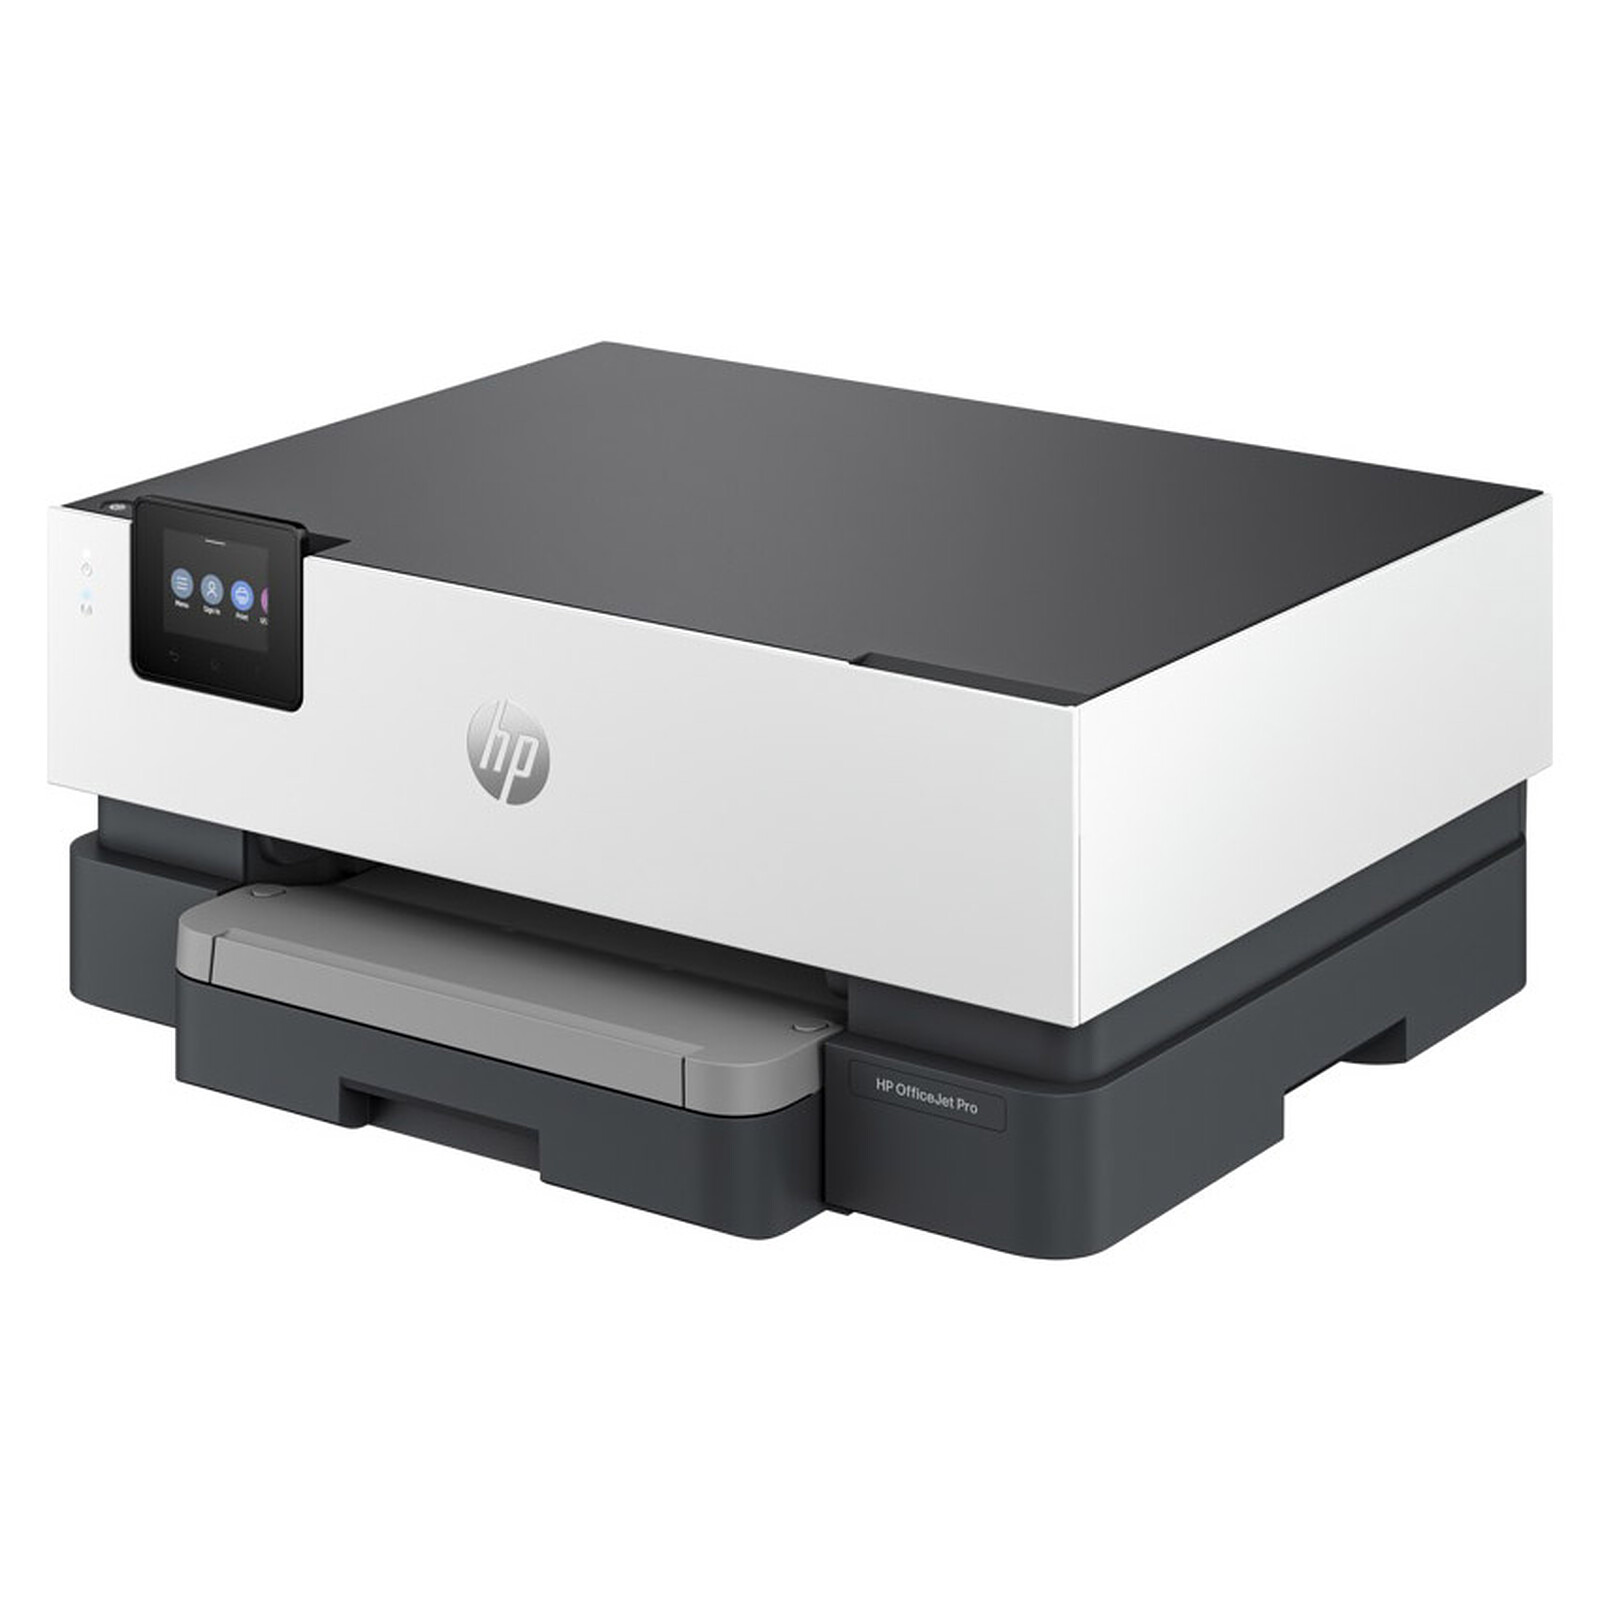 HP OfficeJet Pro 7720 Wide Format All-in-One Printer Review